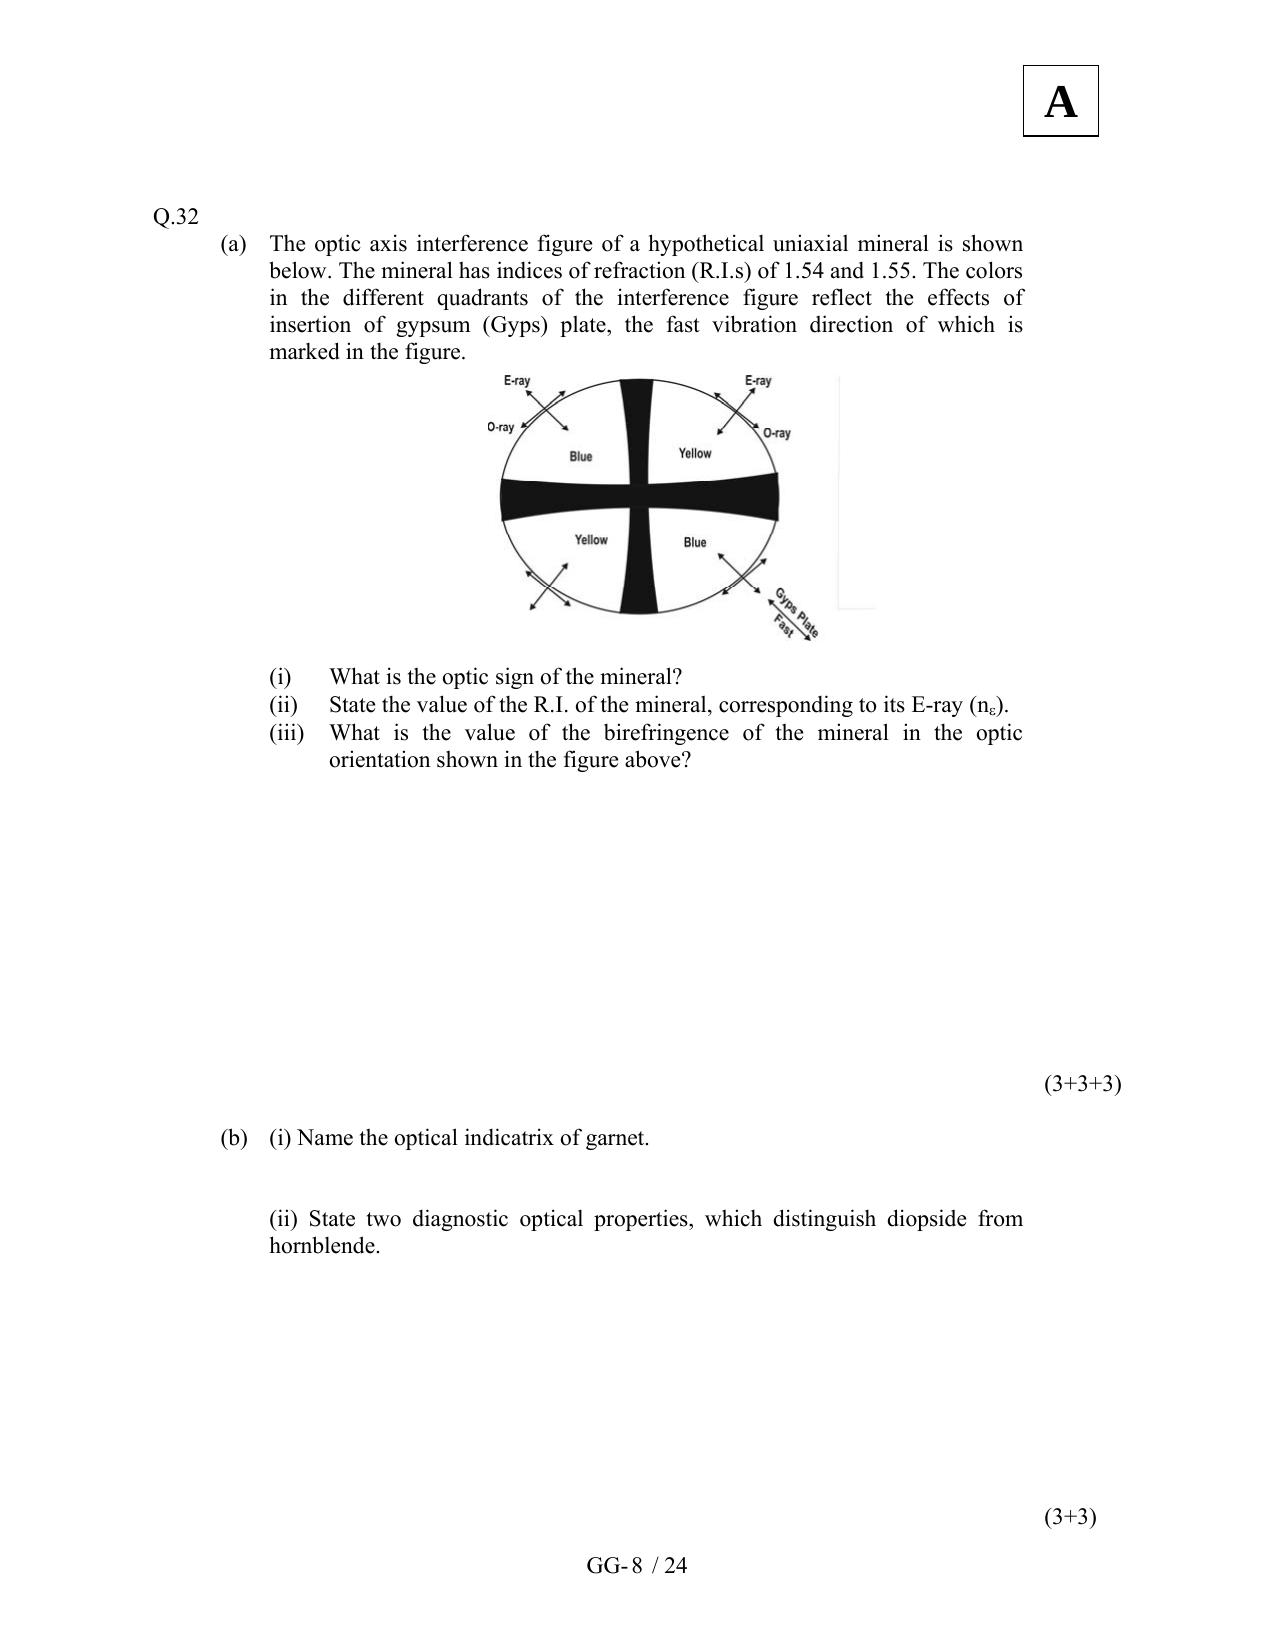 JAM 2012: GG Question Paper - Page 10